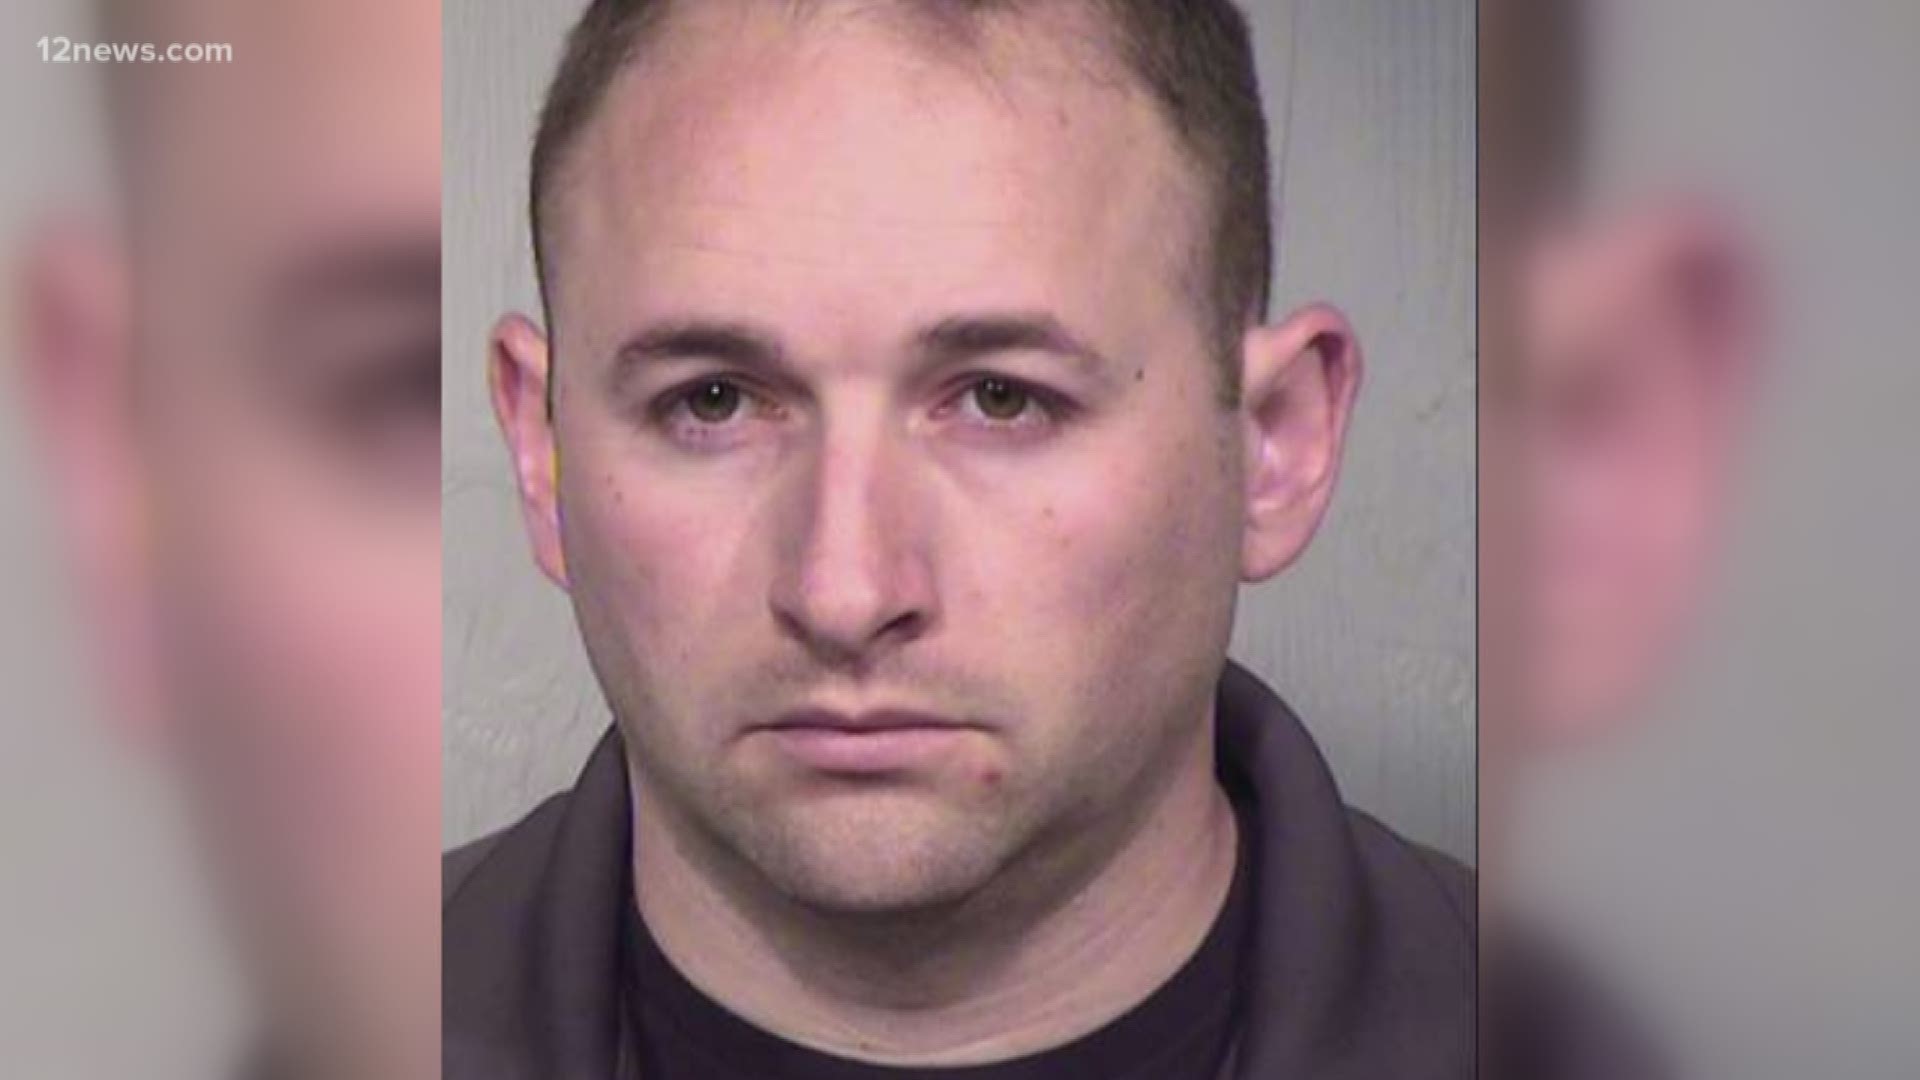 The Maricopa County Sheriff's Office said the deputy was arrested and his employment terminated after he was accused of stealing money from a dead body during an investigation.